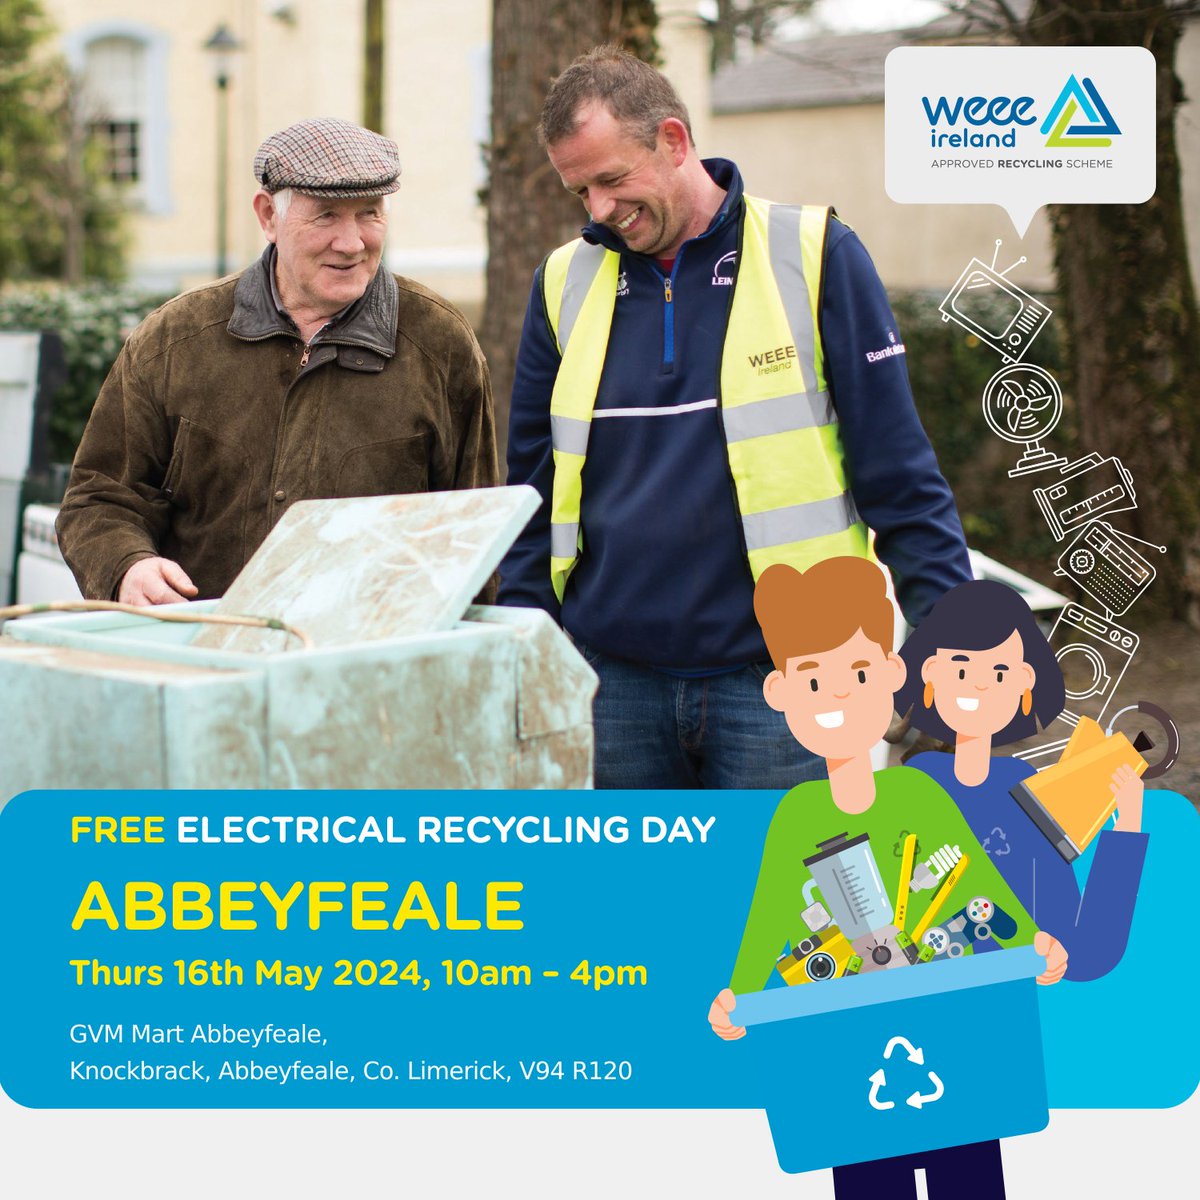 Your next FREE collection for WEEE items is in Abbeyfeale, County Limerick at the GVM Mart Abbeyfeale on Thurs, May 16th, 2024 from 10am - 4pm! ♻️ WEEE recycle anything from your household with a plug or battery! weeeireland.ie/household-recy… @limerickcouncil @limerickenviron